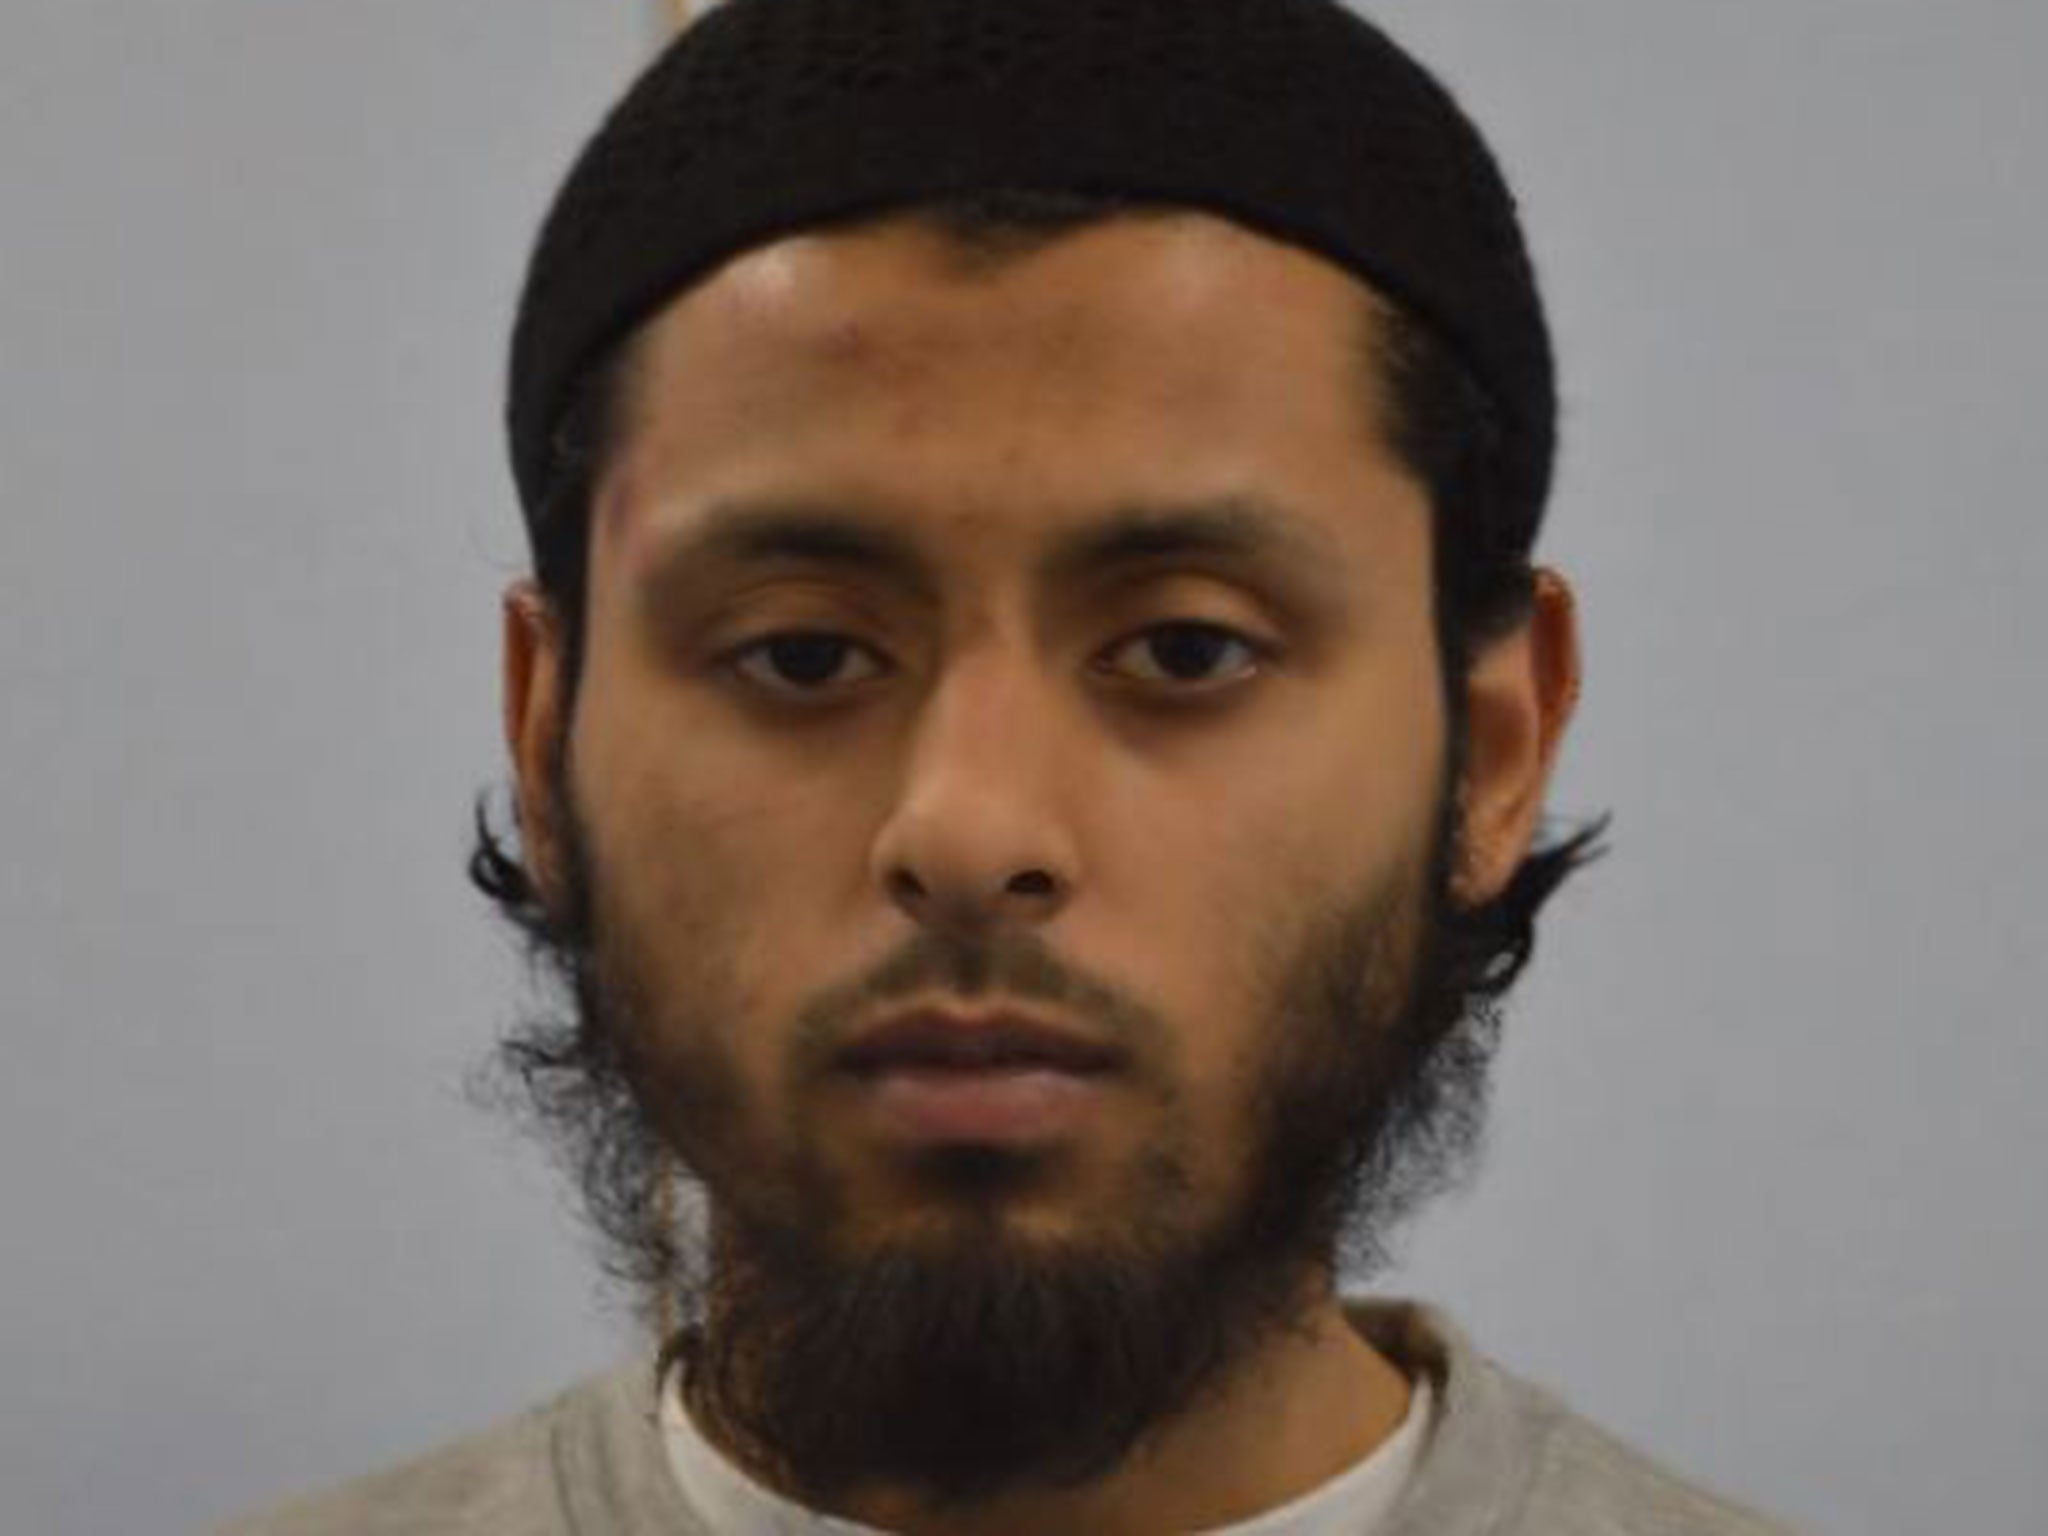 Umar Haque, 25, has been jailed for life after trying to recruit children to launch terror attacks in London